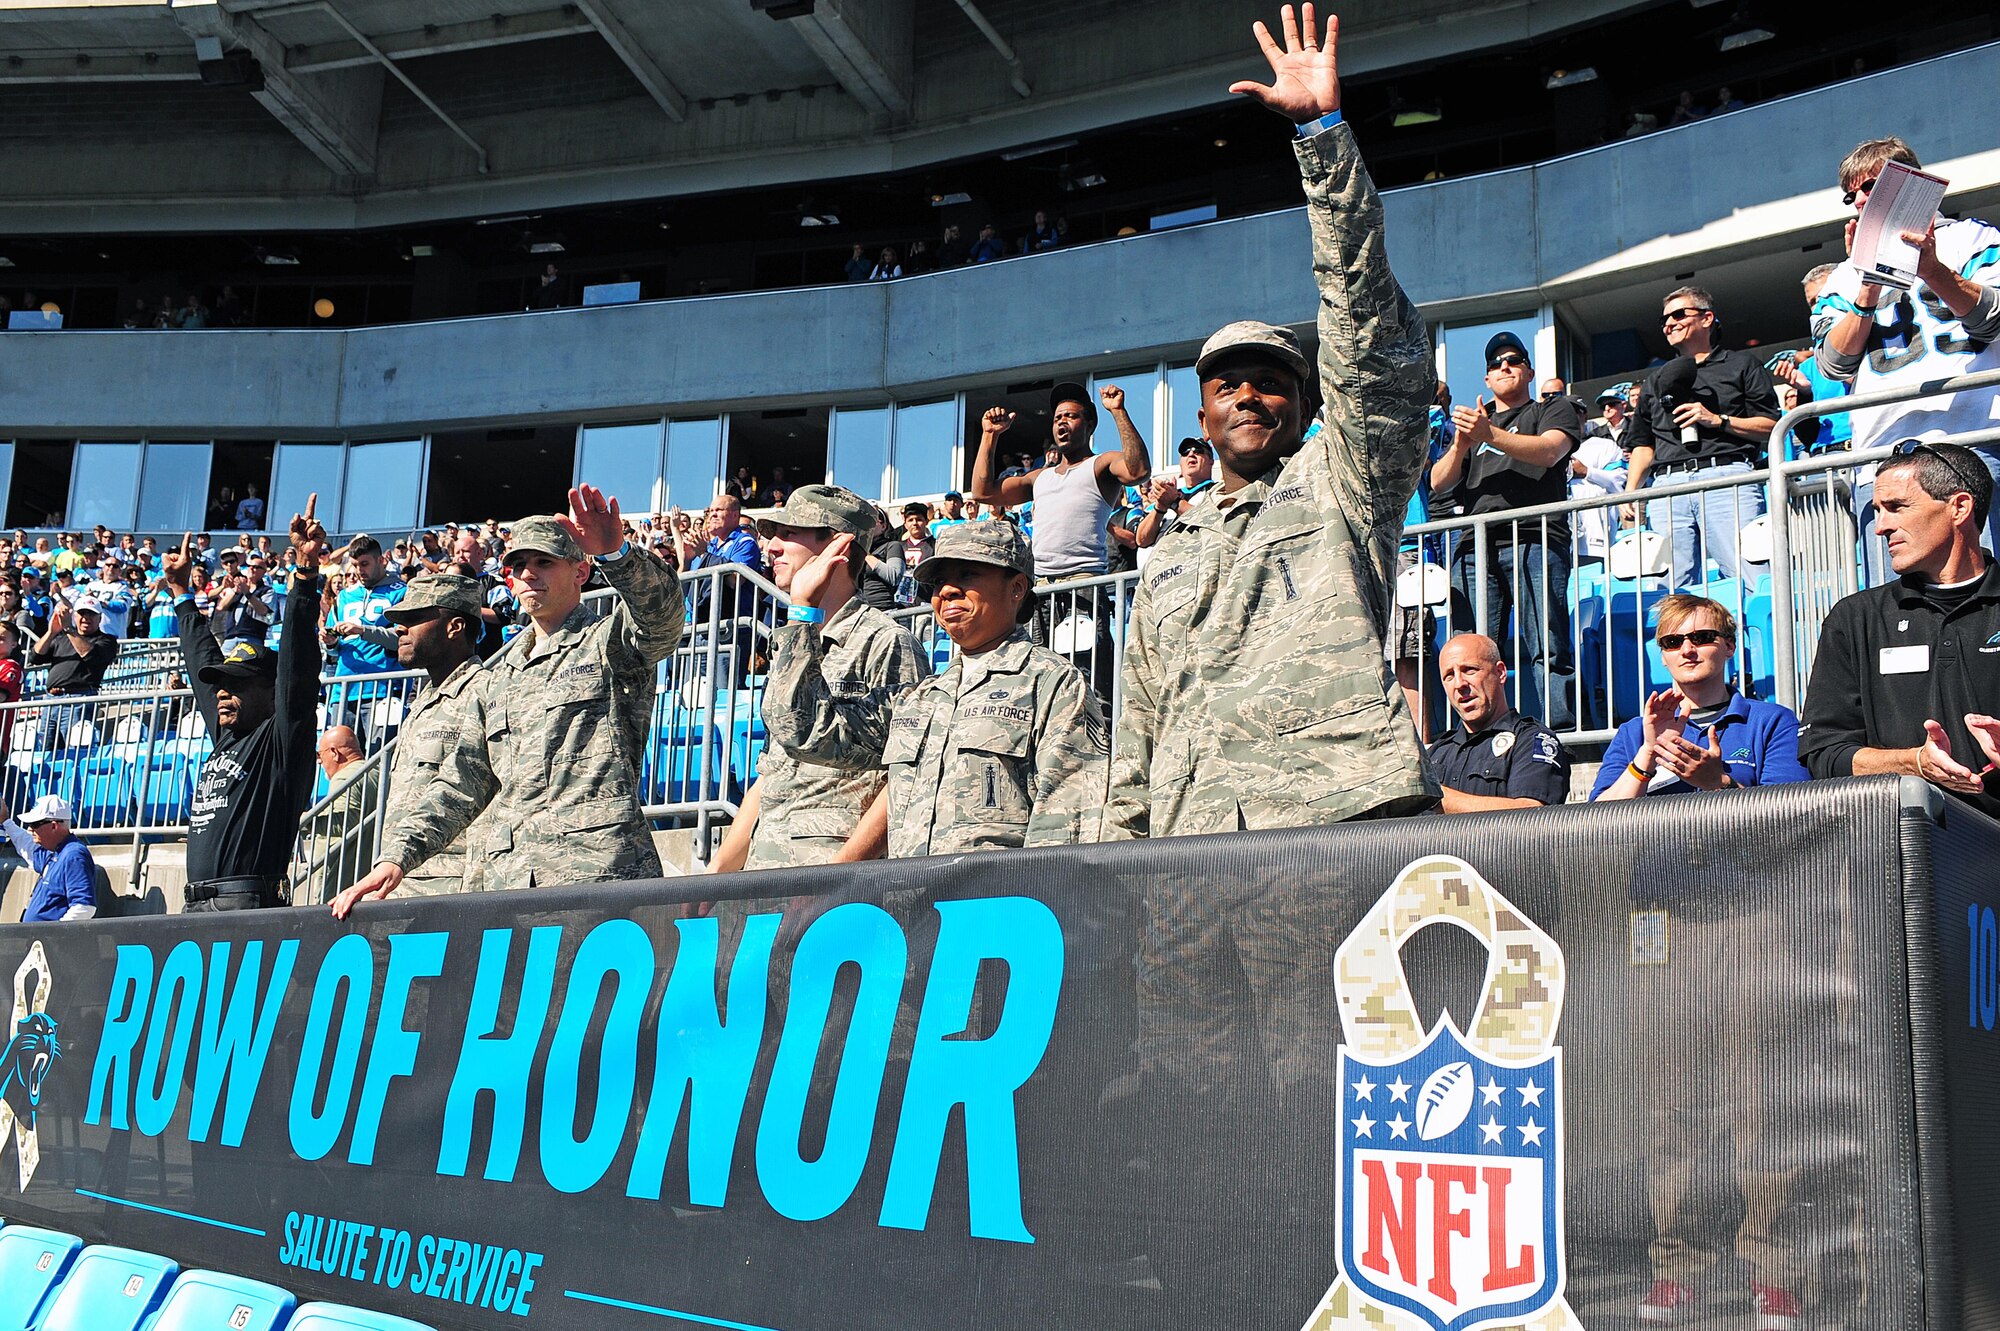 Airmen watch Carolina Panthers from 'Row of Honor' > Edwards Air